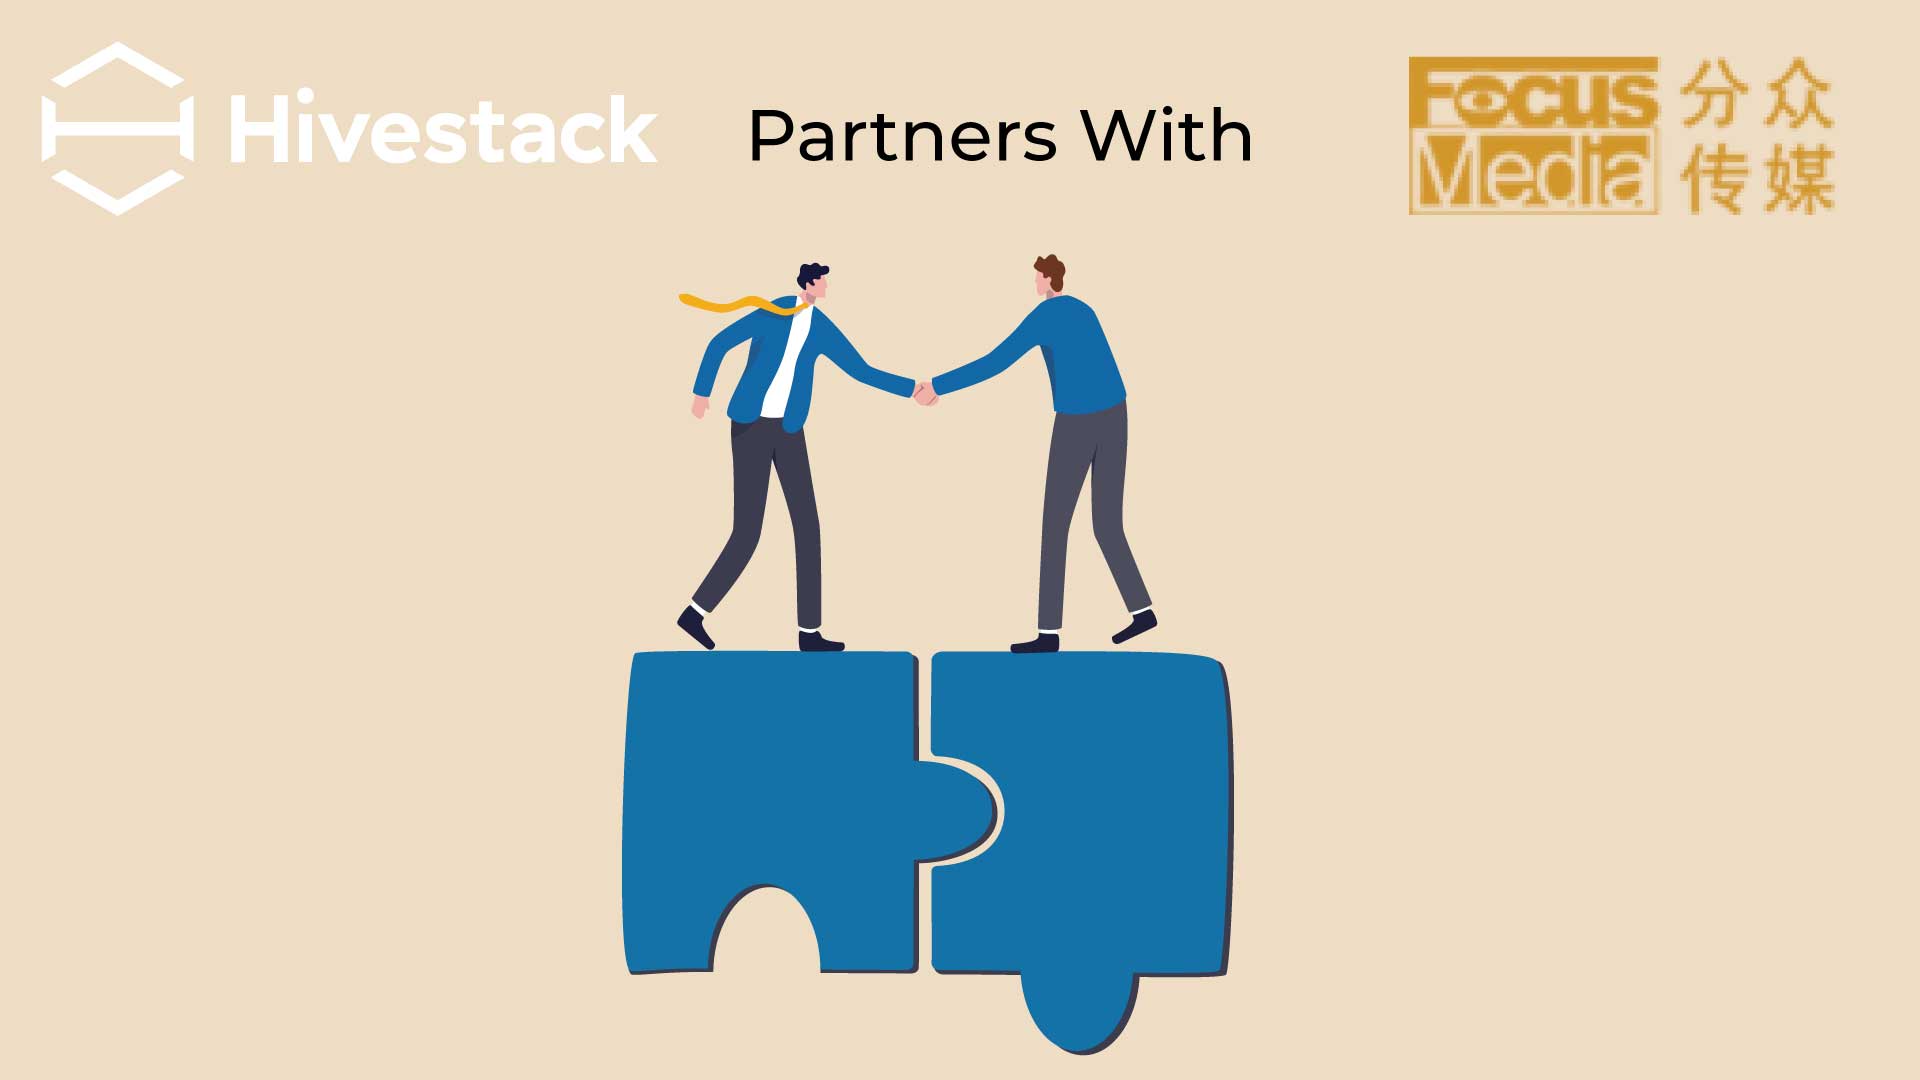 Hivestack partners with China's leading offline advertising solution provider, Focus Media